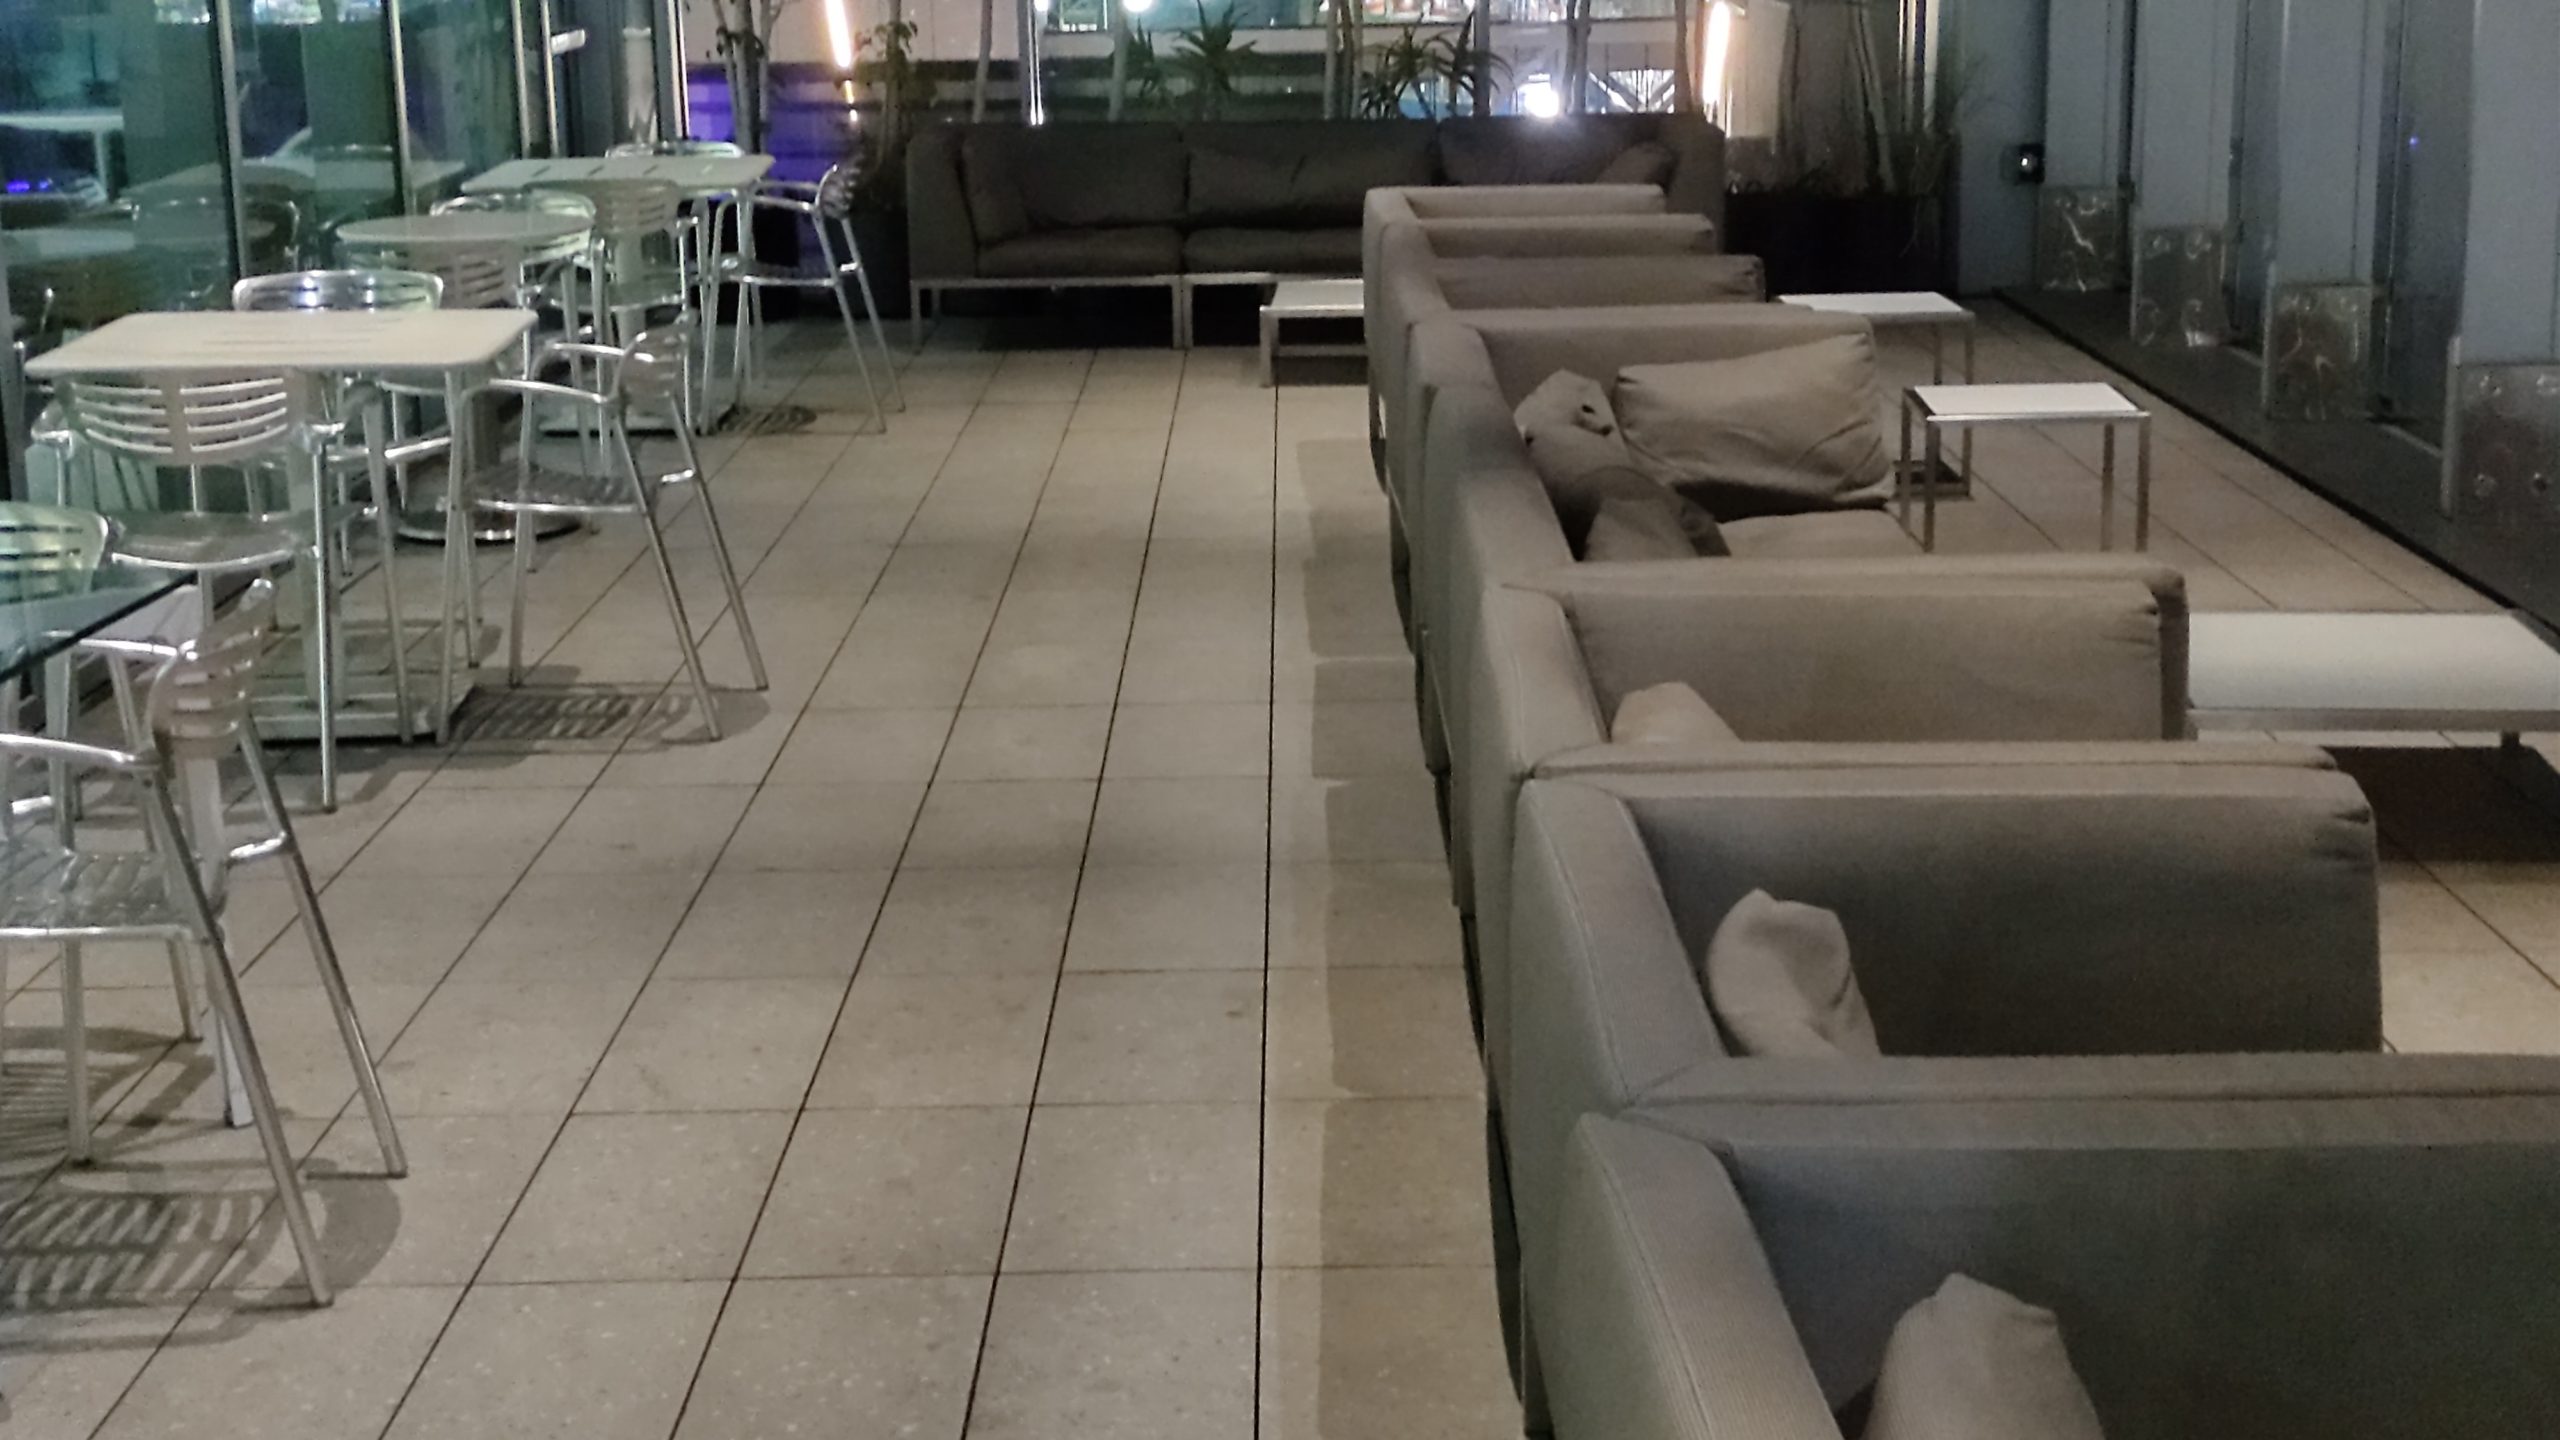 PICTURE OF THE SEATING AT THE CLUB.